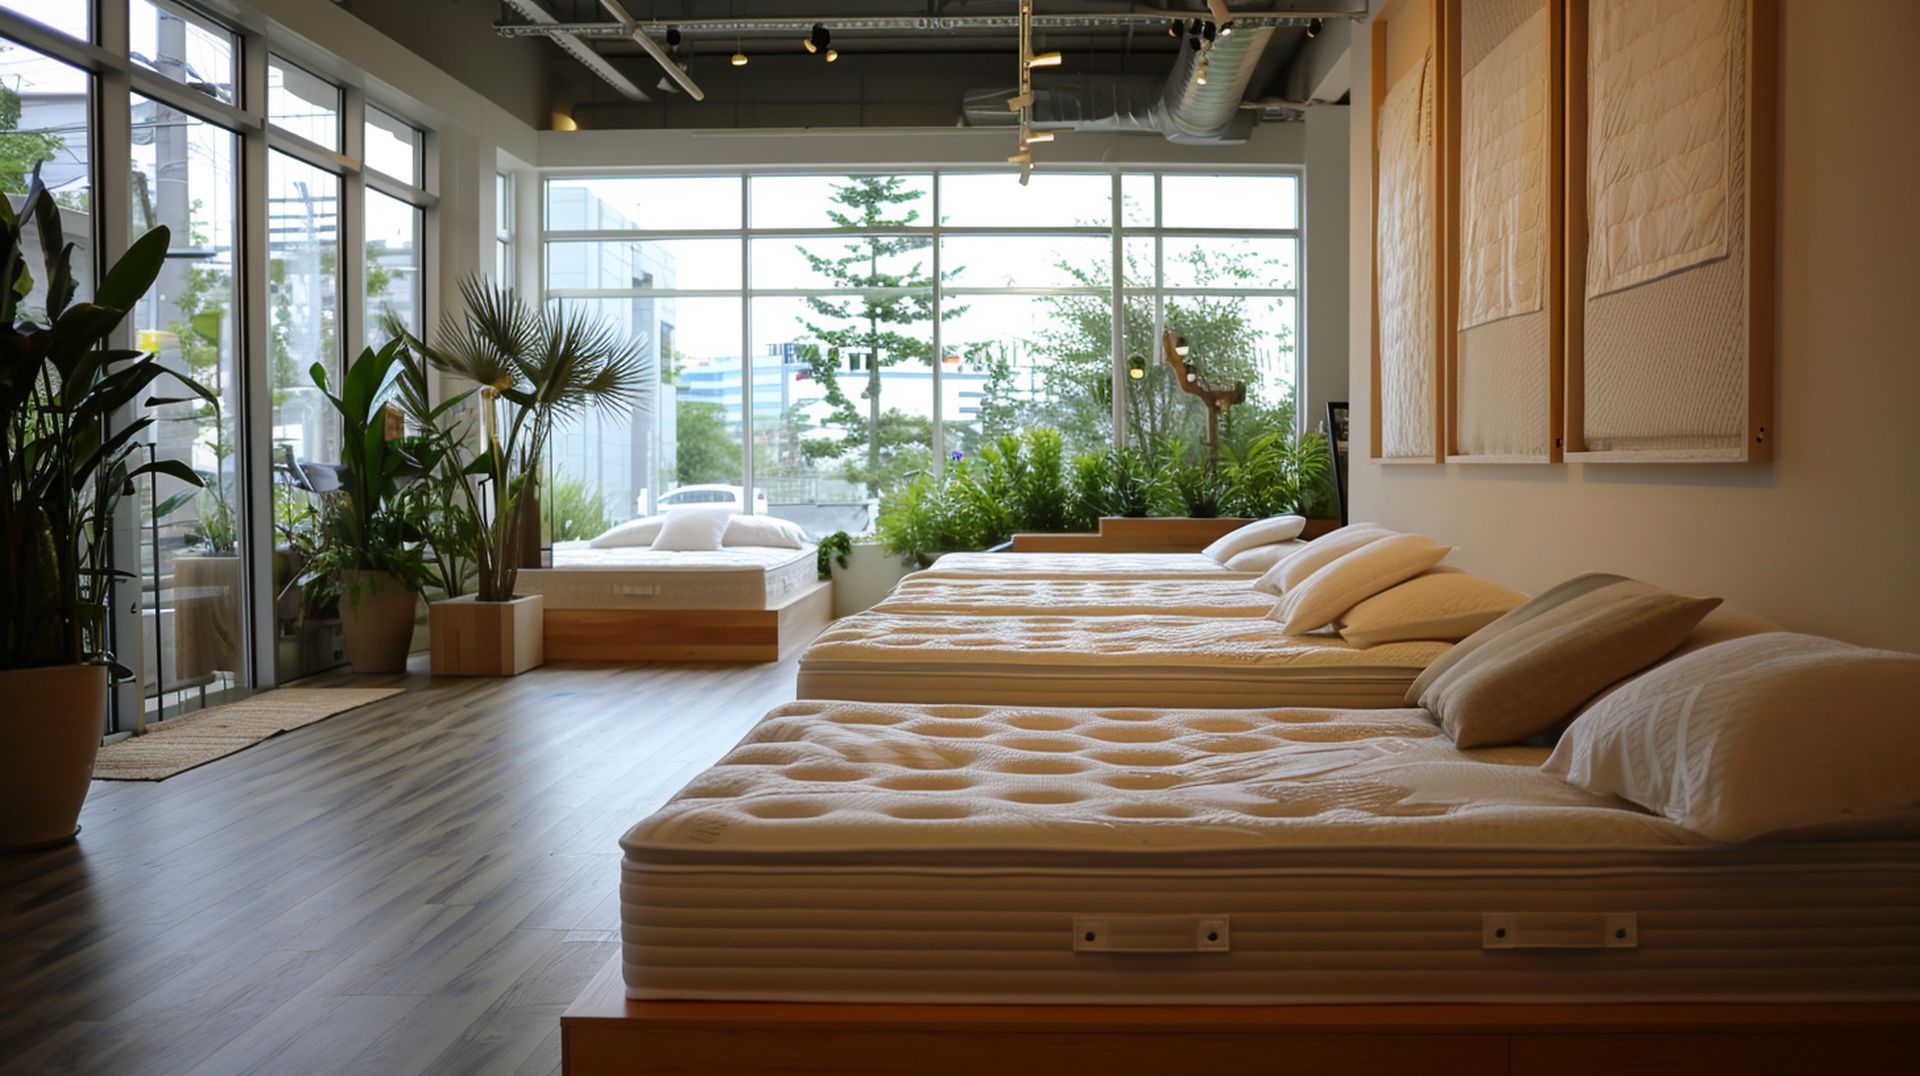 If you're looking for a new bed, mattress stores in Anaheim offer the best customer and delivery service, financing, and warranties in California